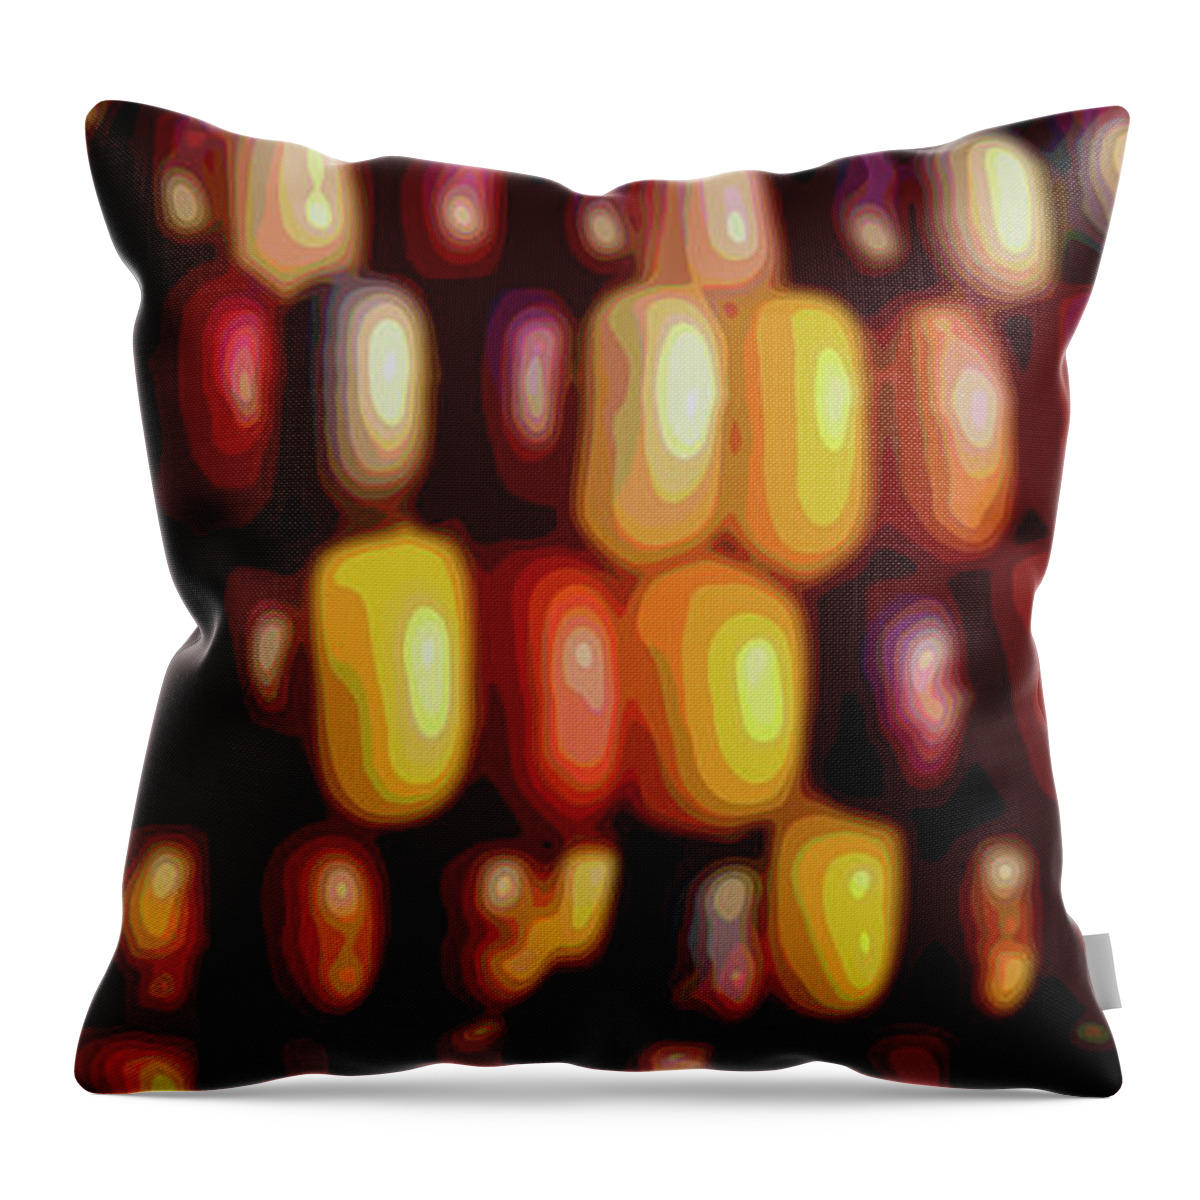 Linda Brody Throw Pillow featuring the digital art Indian Corn Posterized I by Linda Brody